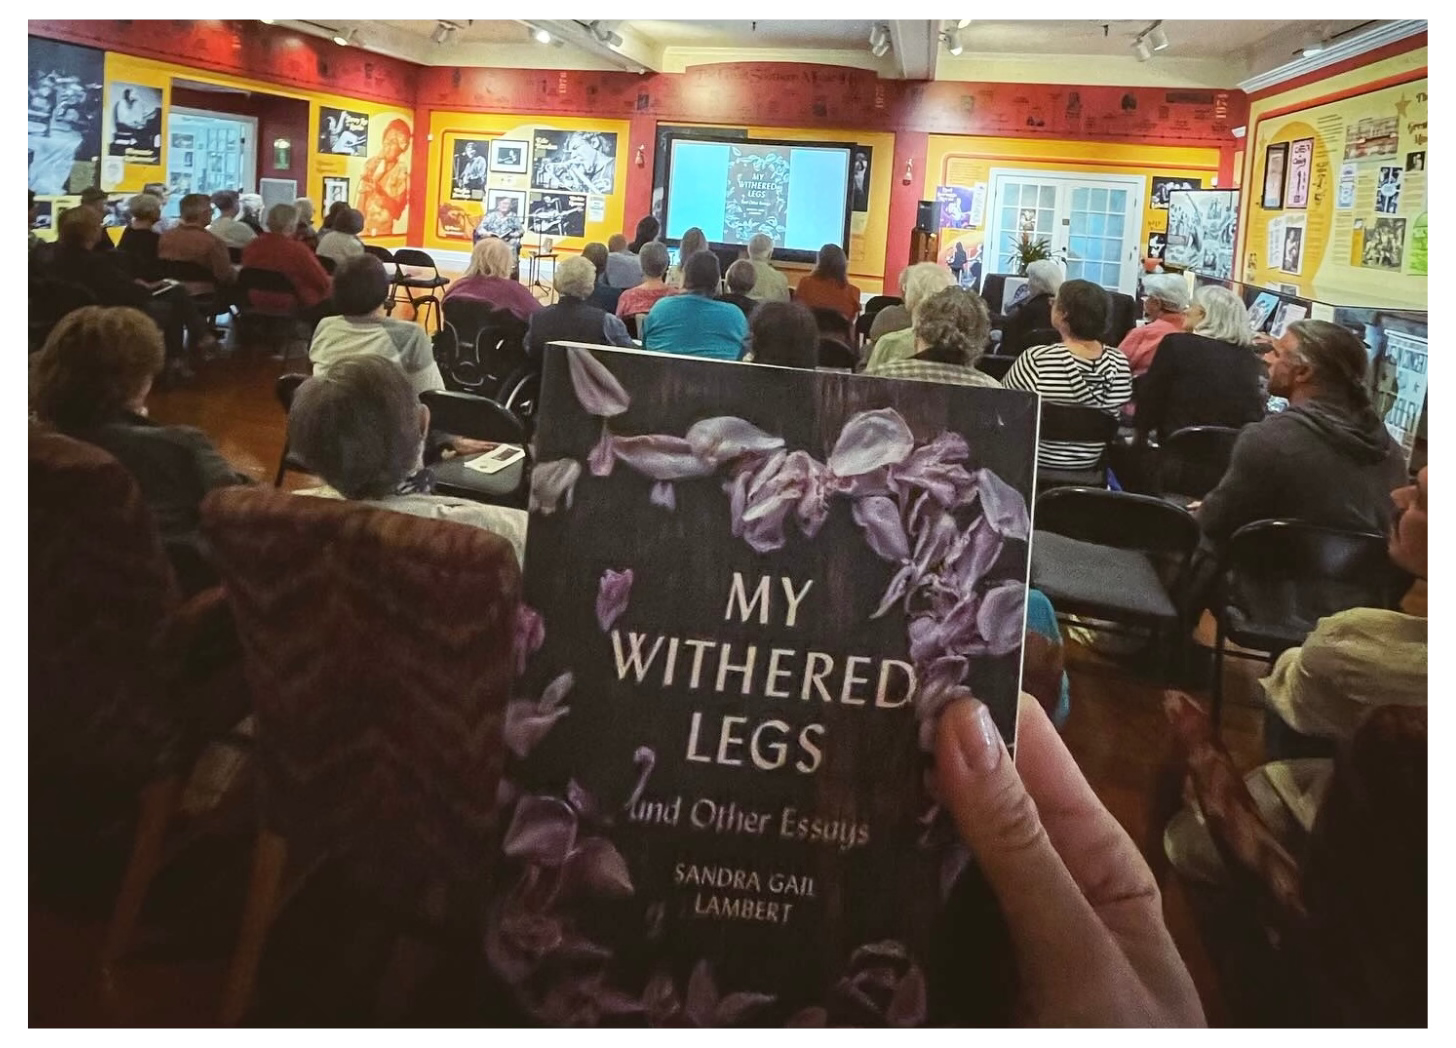 The view from the back of a large room with an audience seated in chairs. In the foreground is a hand holding up a copy of My Withered Legs and Other Essays by Sandra Gail Lambert